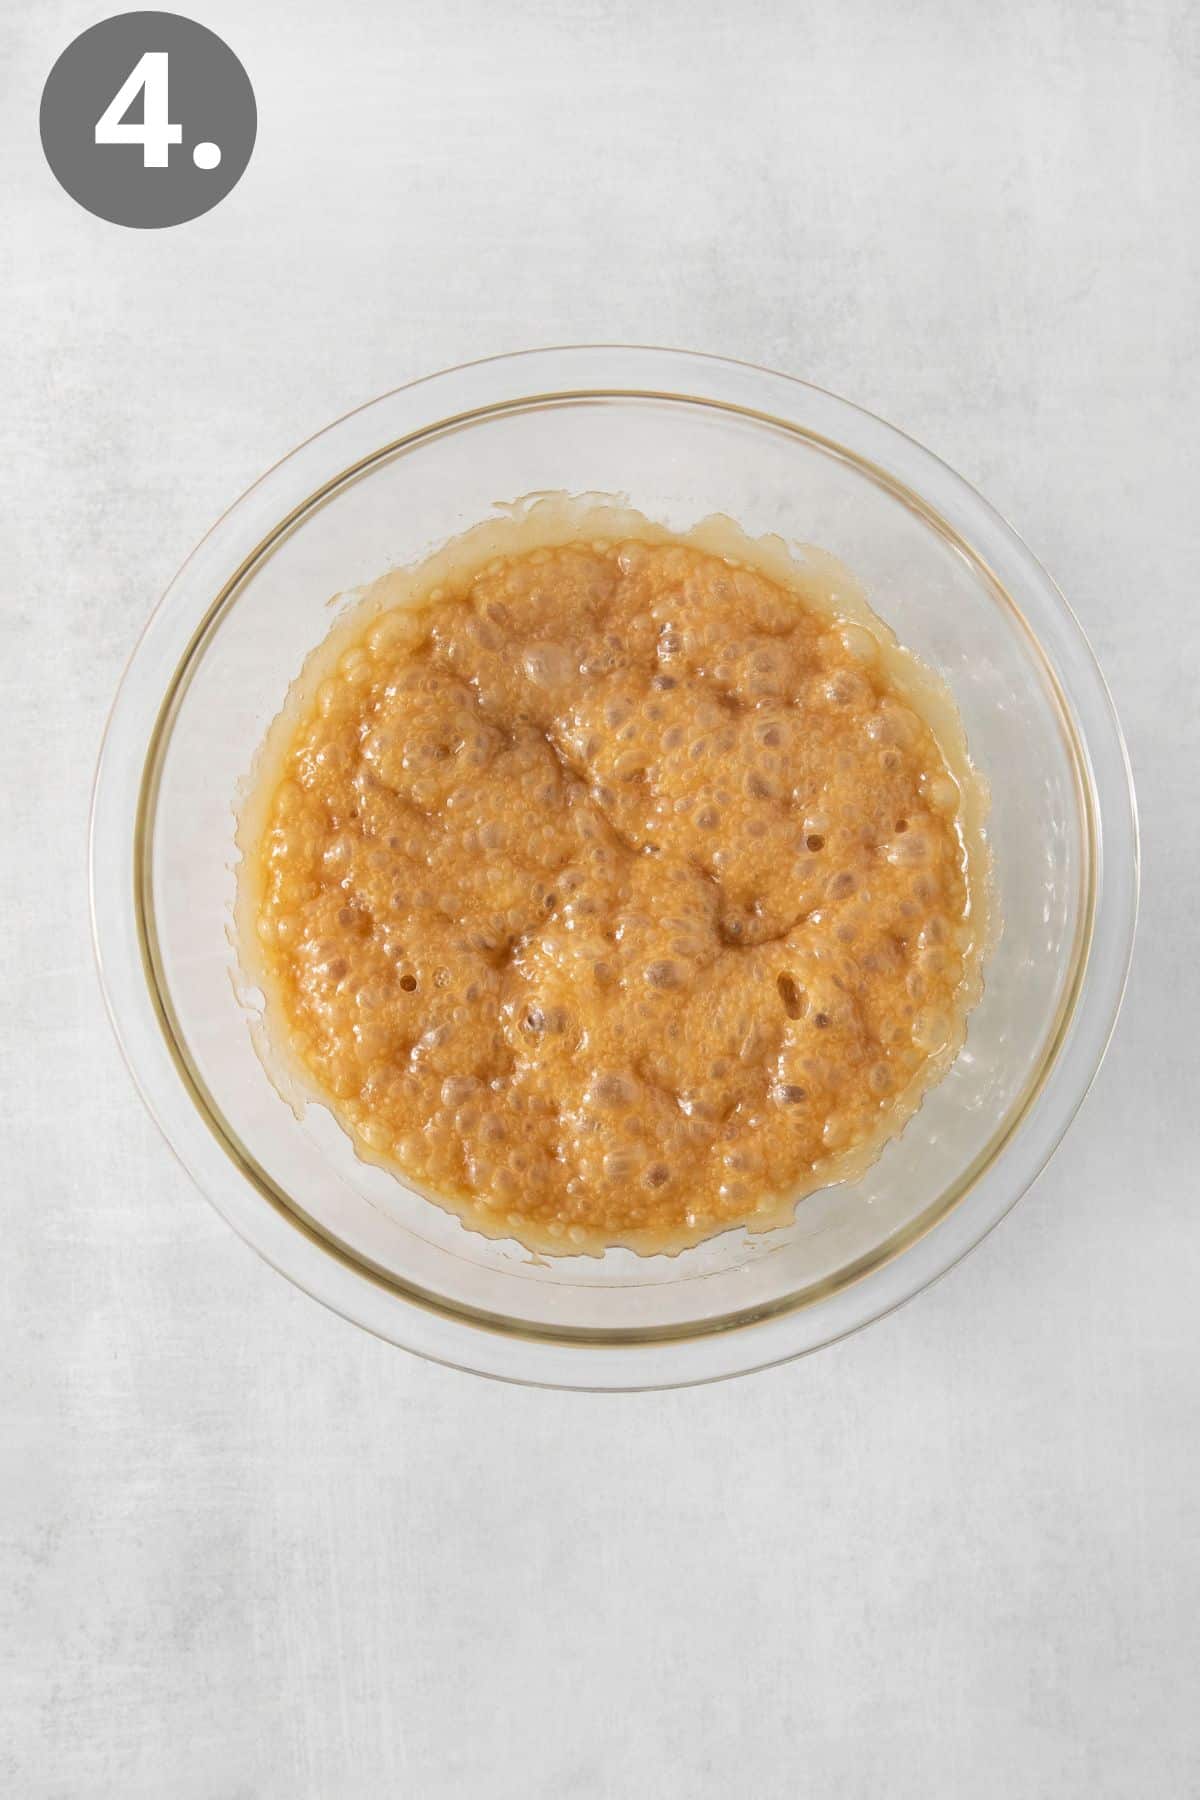 Microwave caramel in a glass bowl